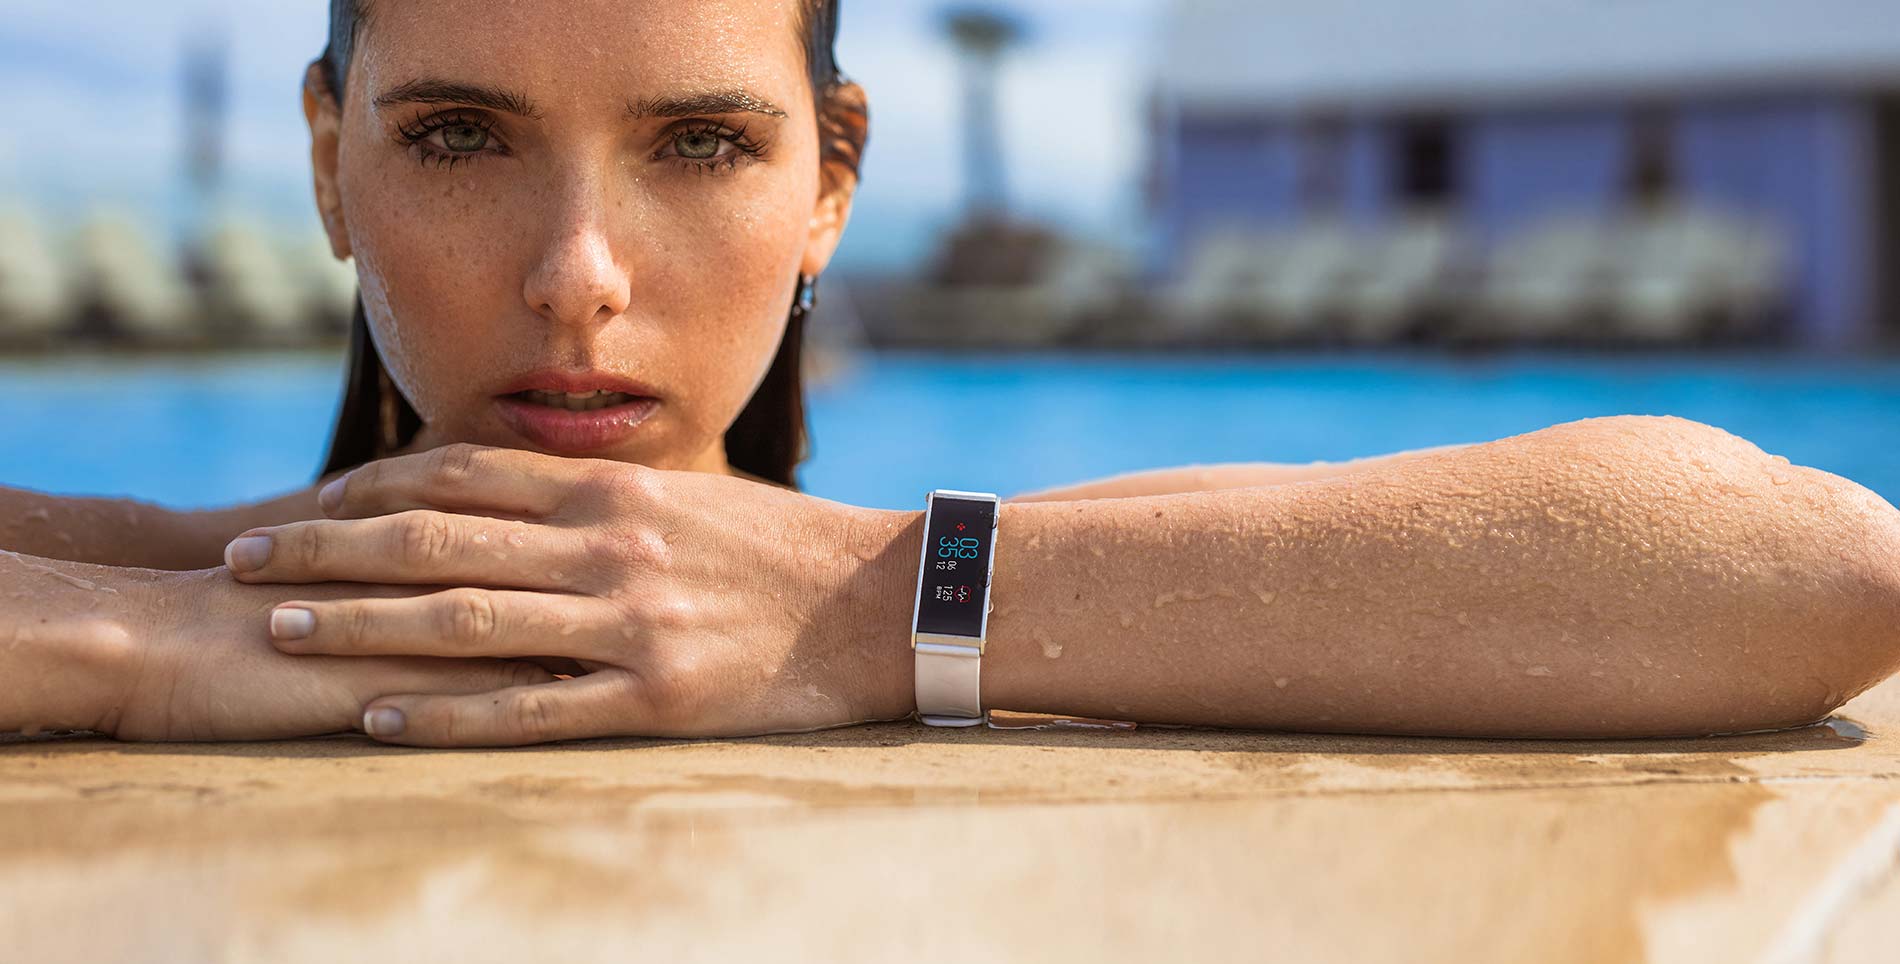 Water resistant activity tracker. IP67, 6: Protected from dust, 7: Protected against the effects of immersion in water to depth between 15 cm and 1 meter